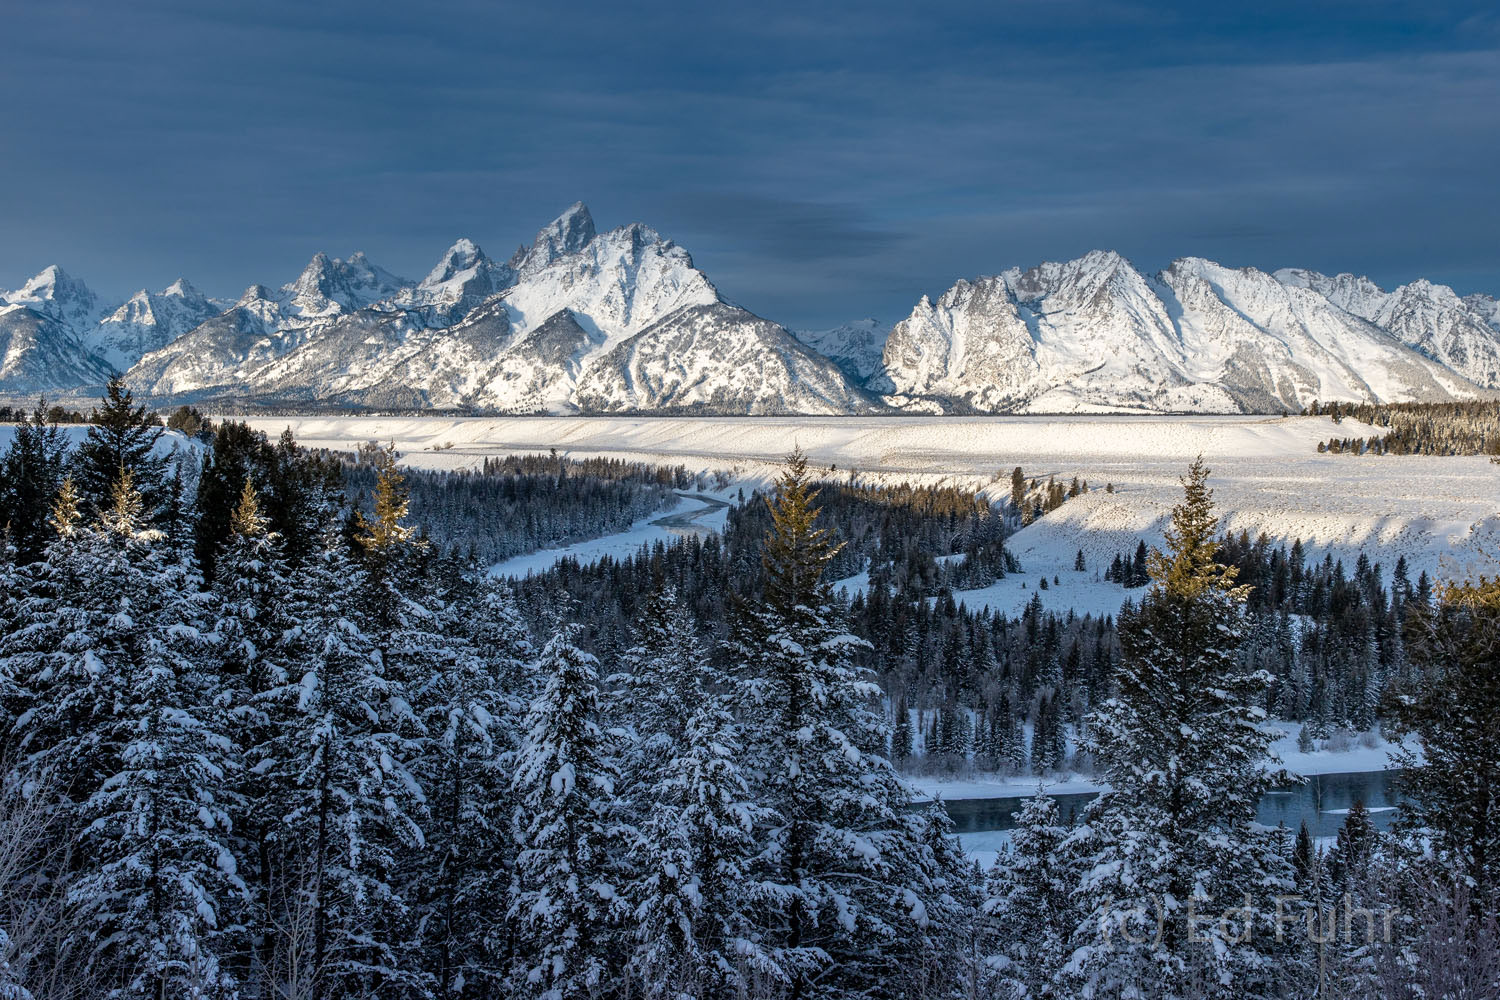 One of the great classic overlooks of the Snake River and Teton Range, the Snake River Overlook - before the pines were his tall...